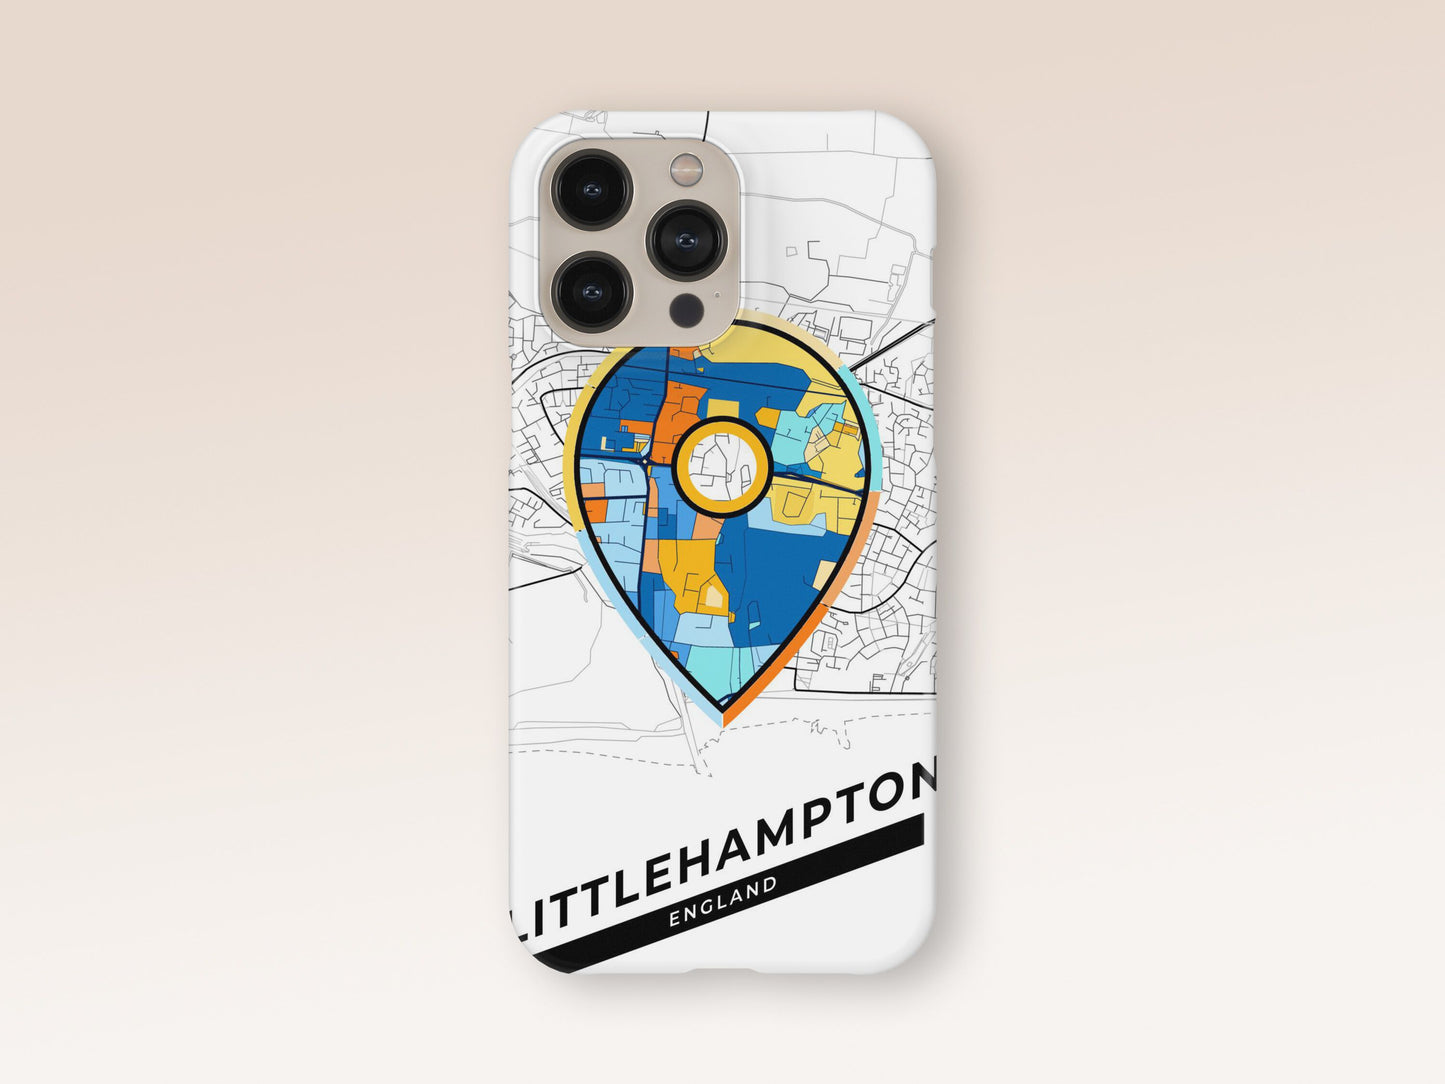 Littlehampton England slim phone case with colorful icon. Birthday, wedding or housewarming gift. Couple match cases. 1